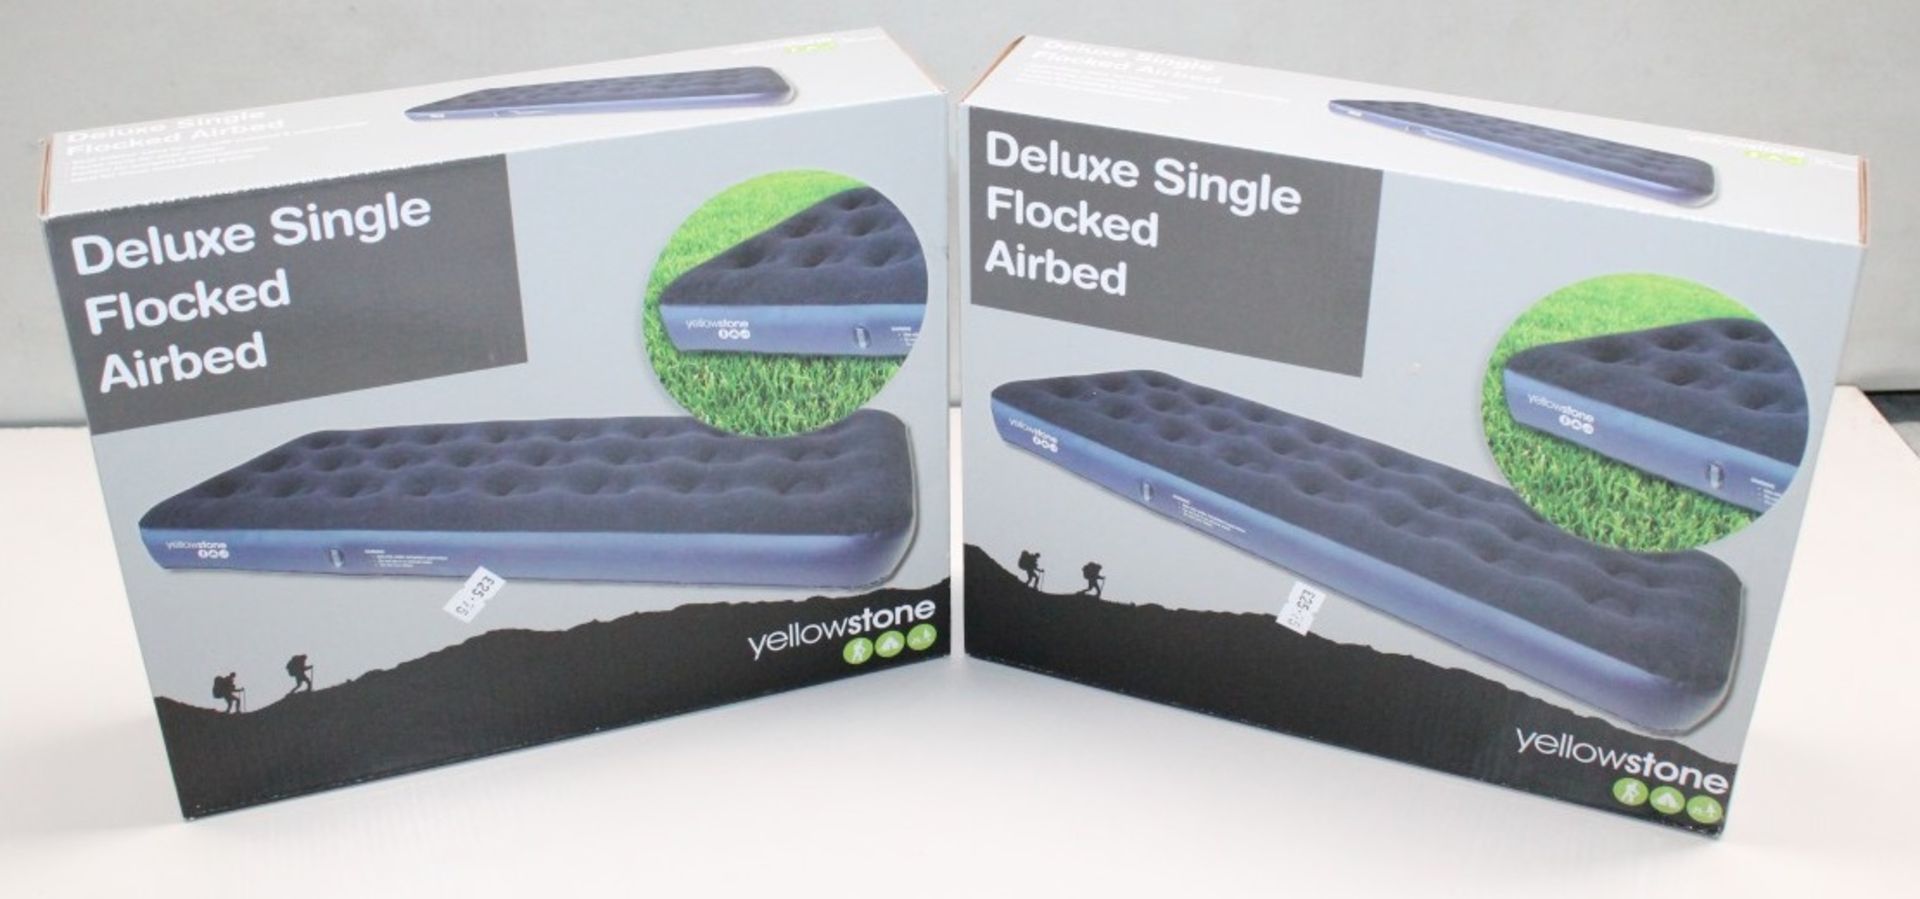 2 x Yellowstone Deluxe Single Flocked Airbeds - Both Blue - Brand New & Boxed  -  Ref: JIM022 -